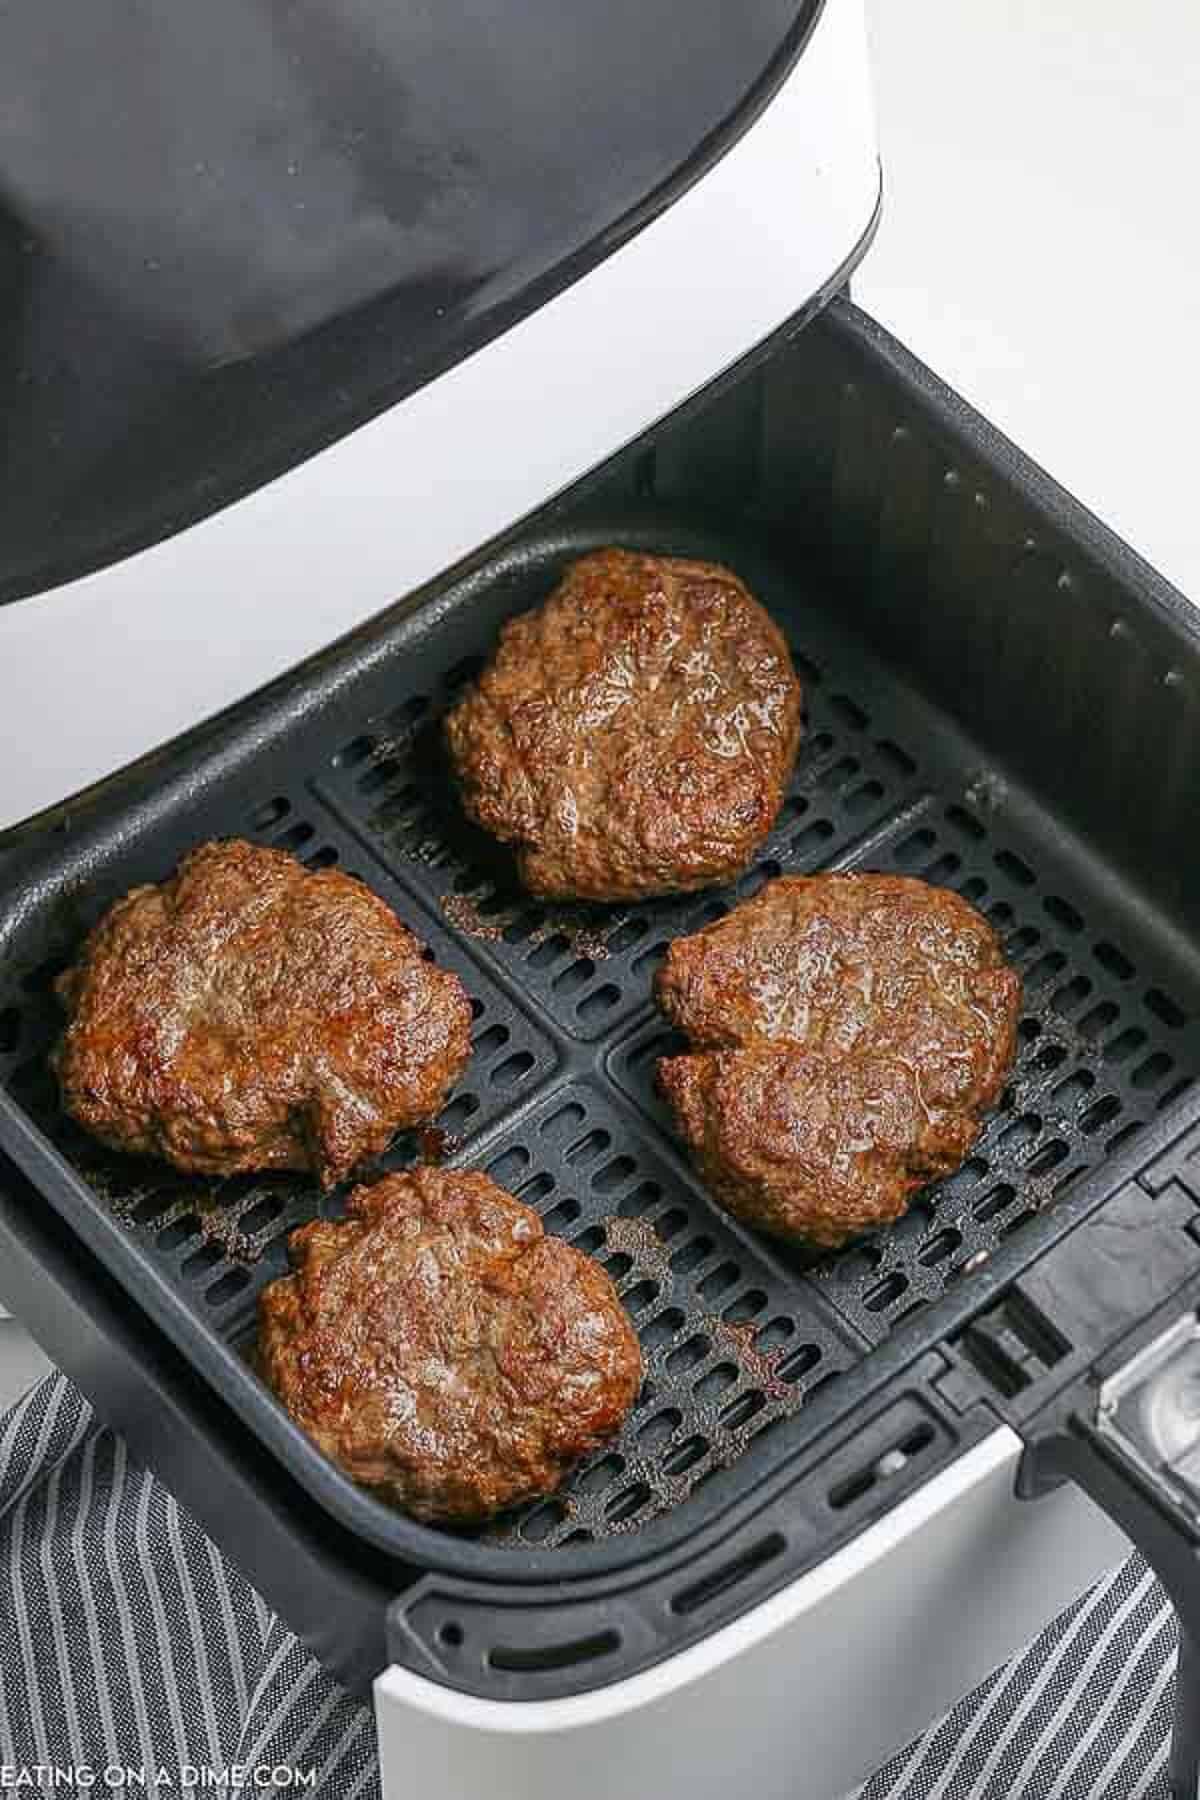 4 hamburger patties being cooked in an air fryer basket.  